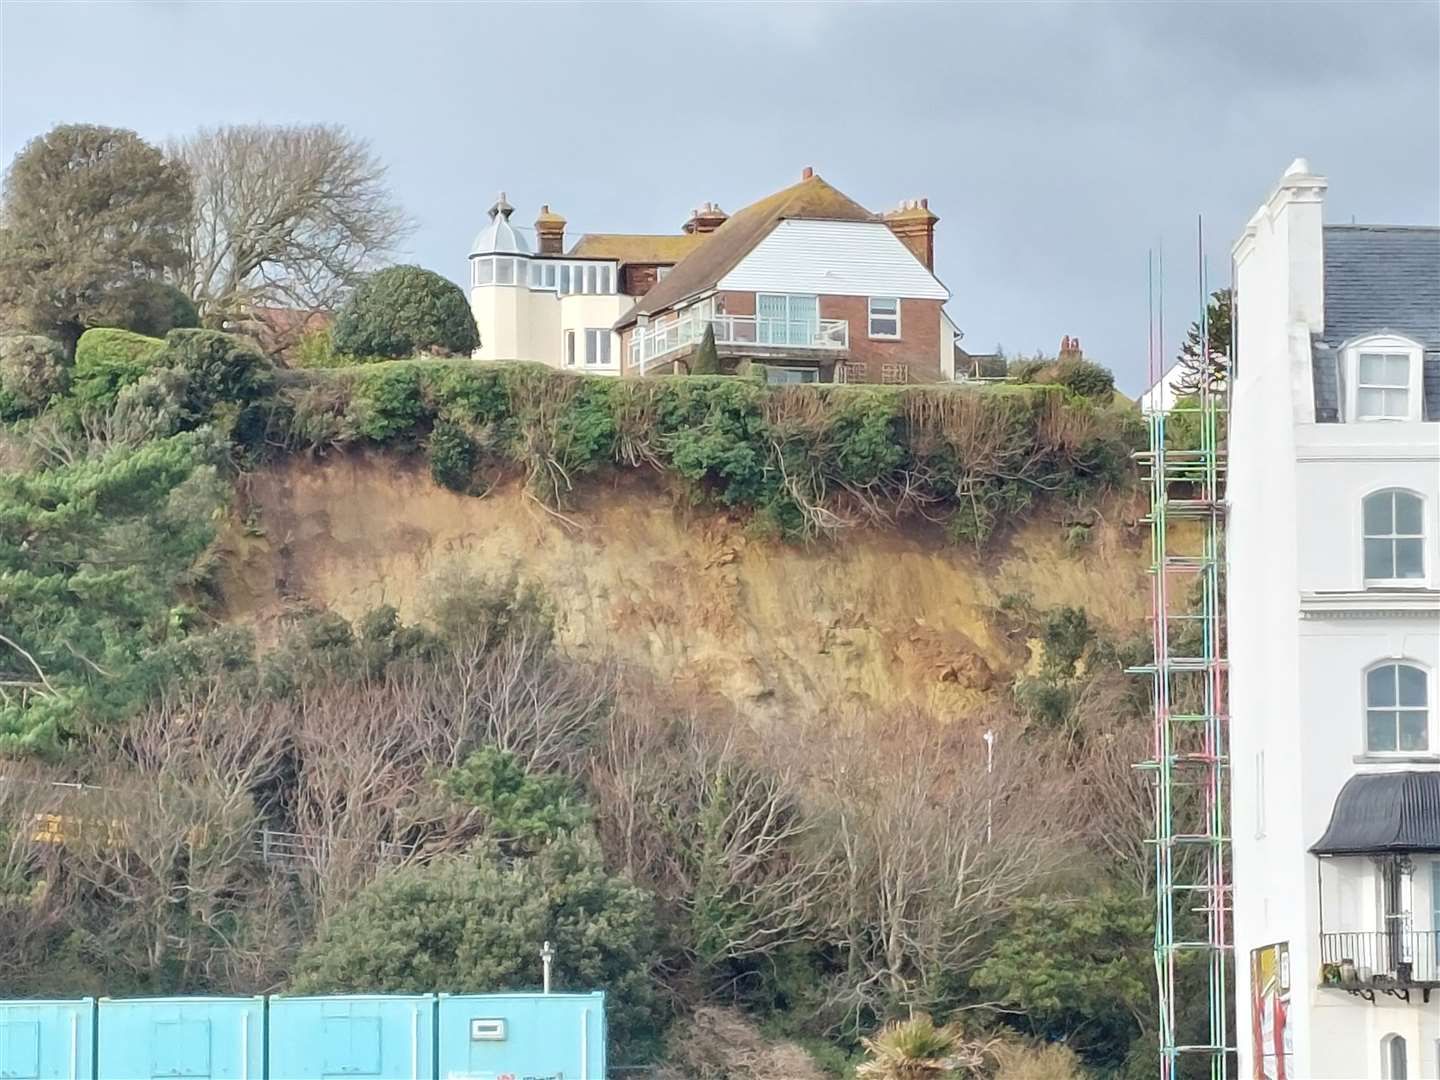 A second landslip has hit the Road of Remembrance, Folkestone